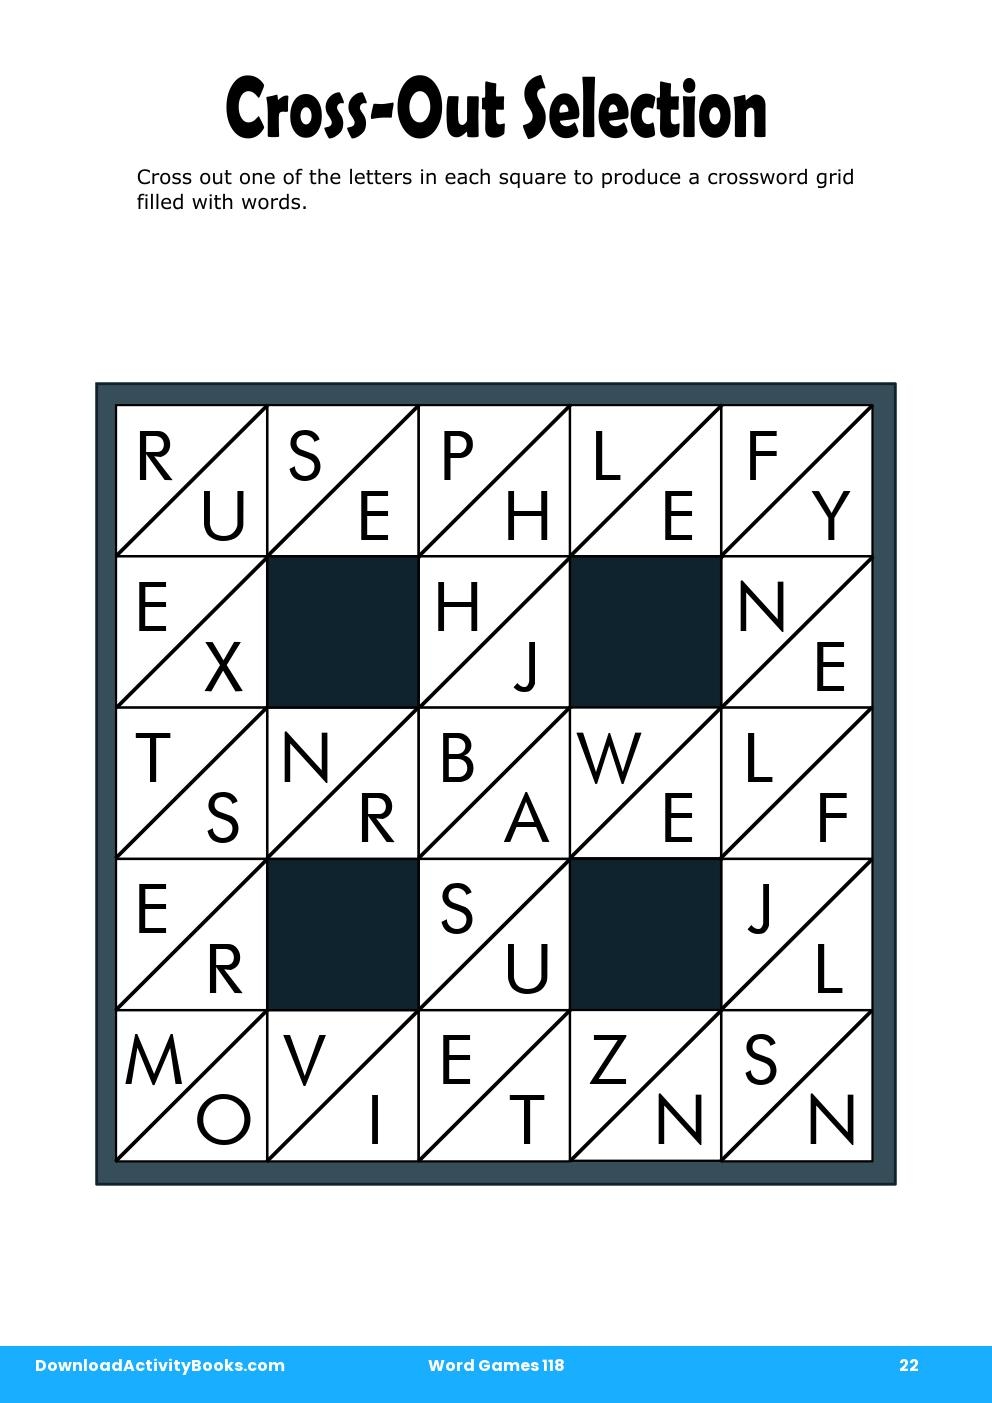 Cross-Out Selection in Word Games 118